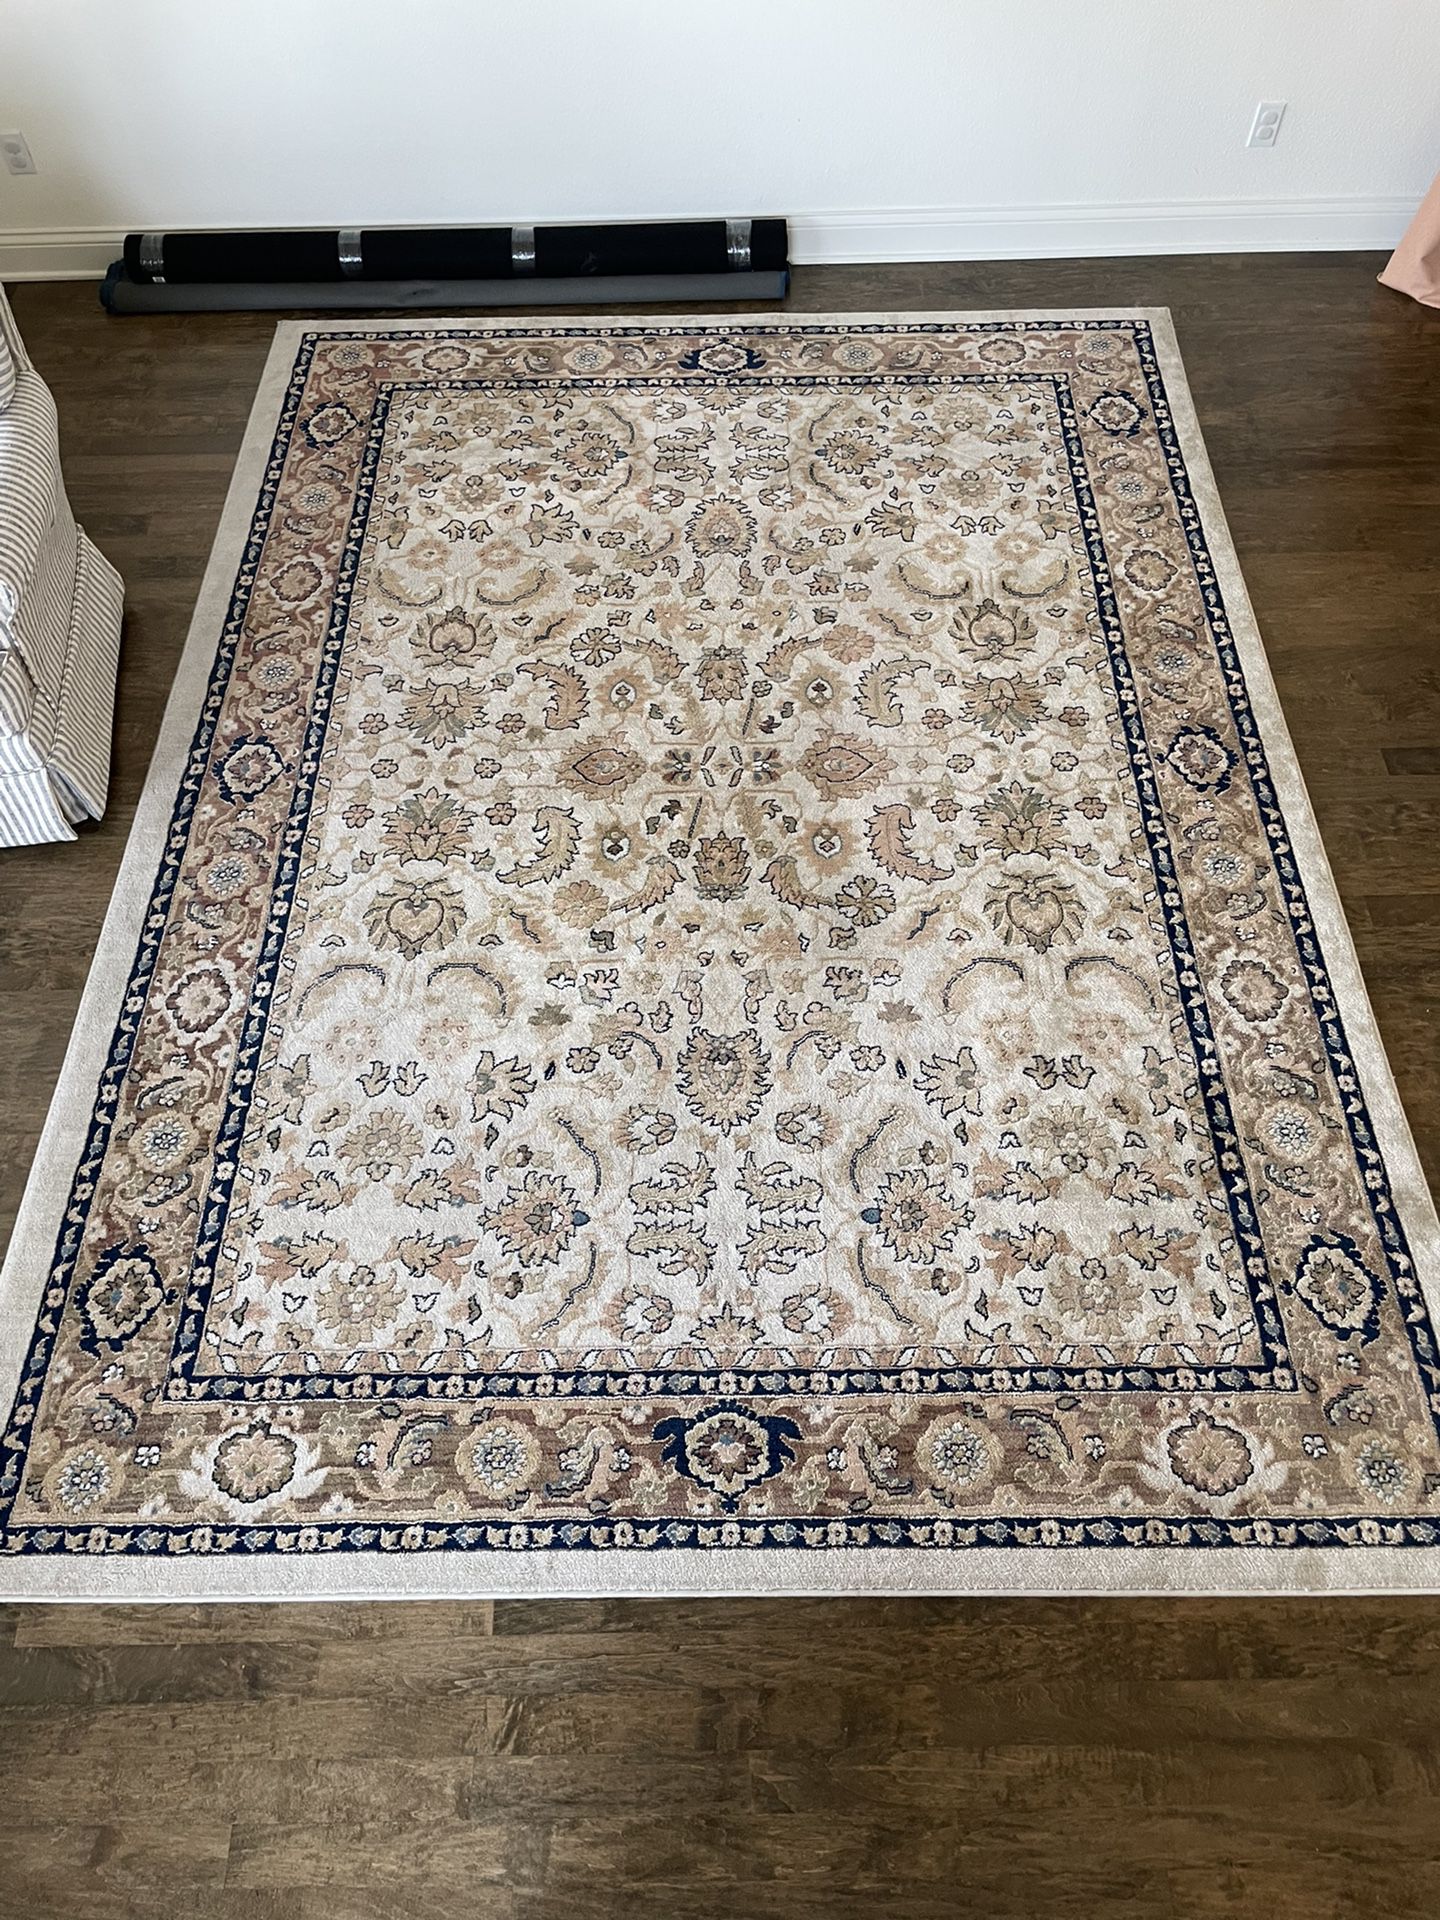 Area rug: 8ft x 10ft 8in